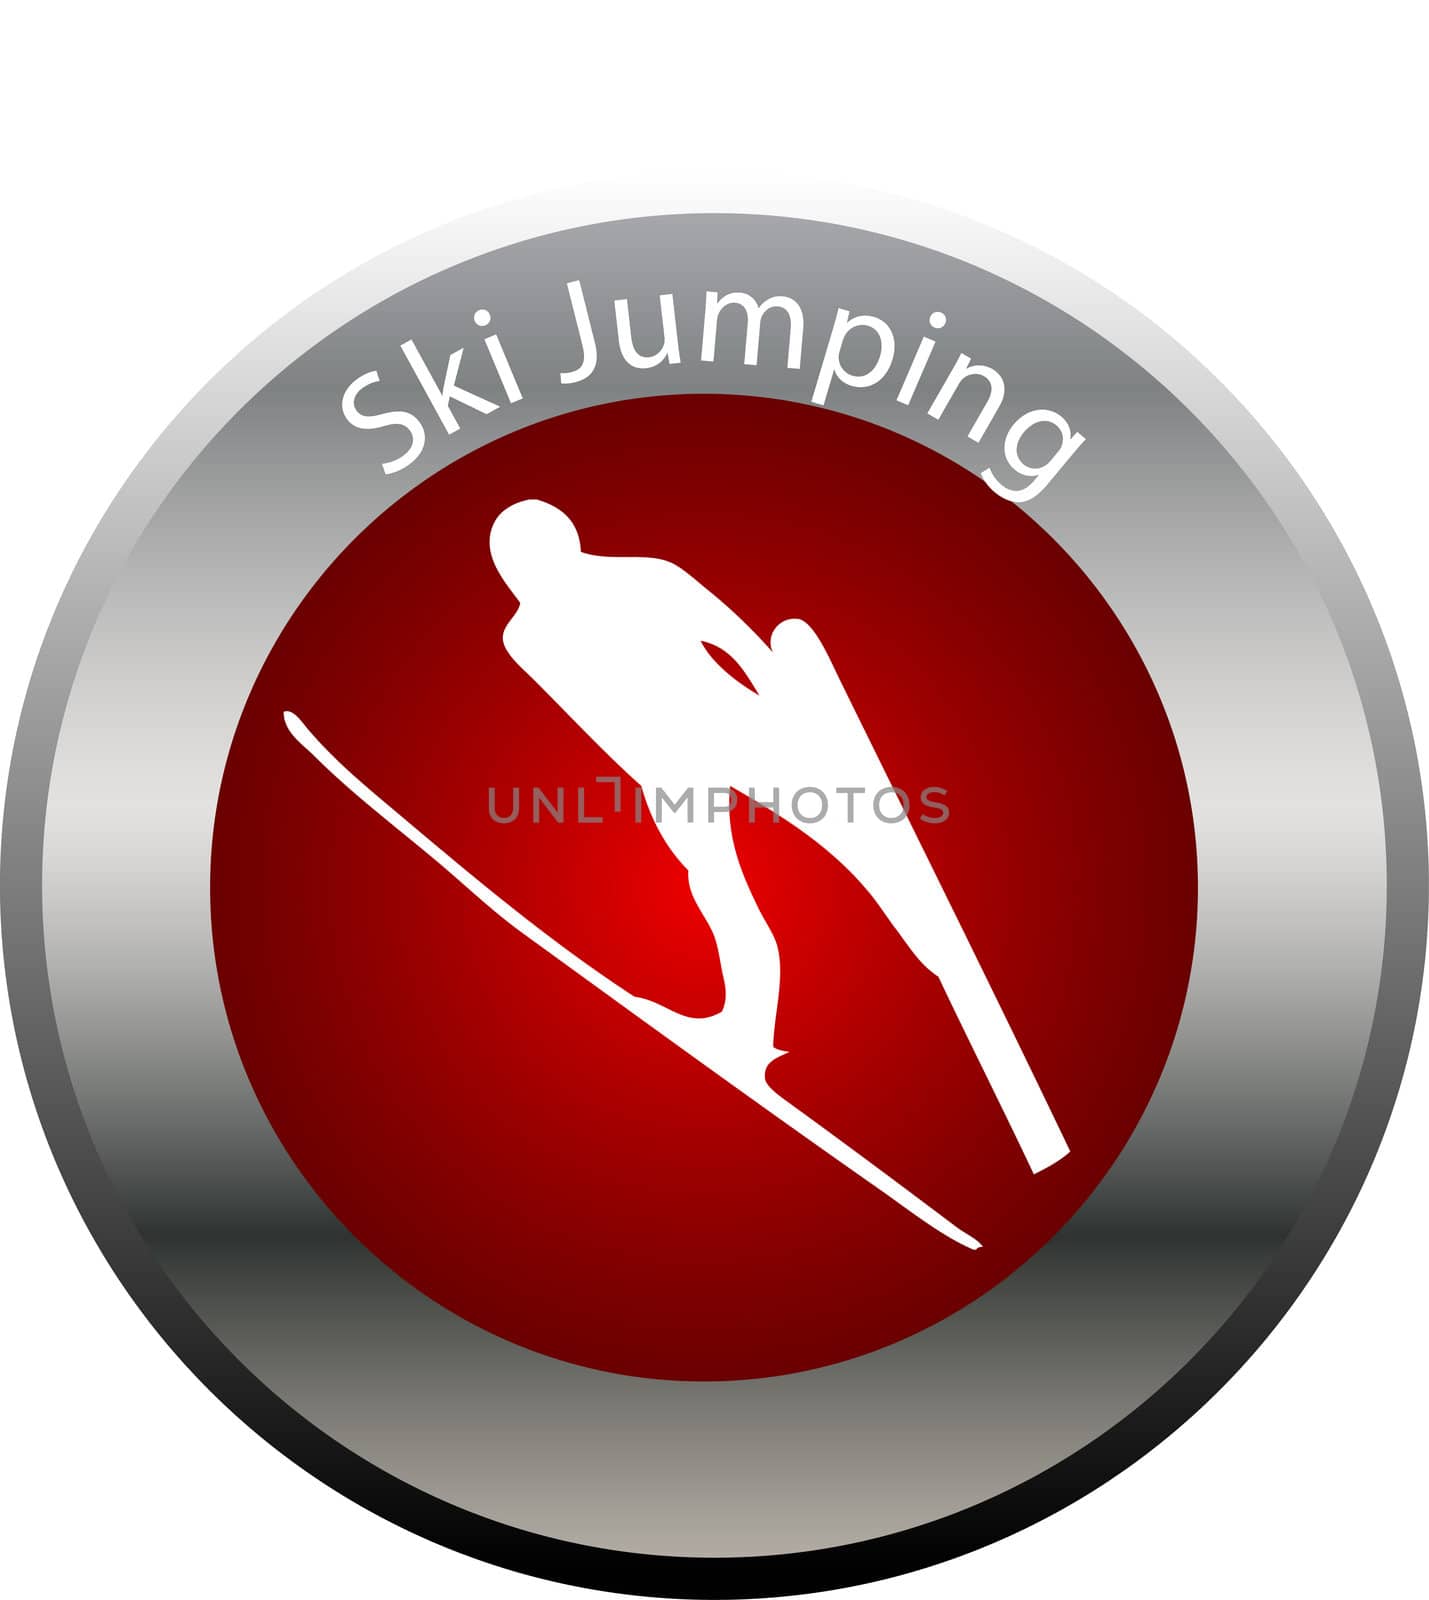 winter game button ski jumping by peromarketing